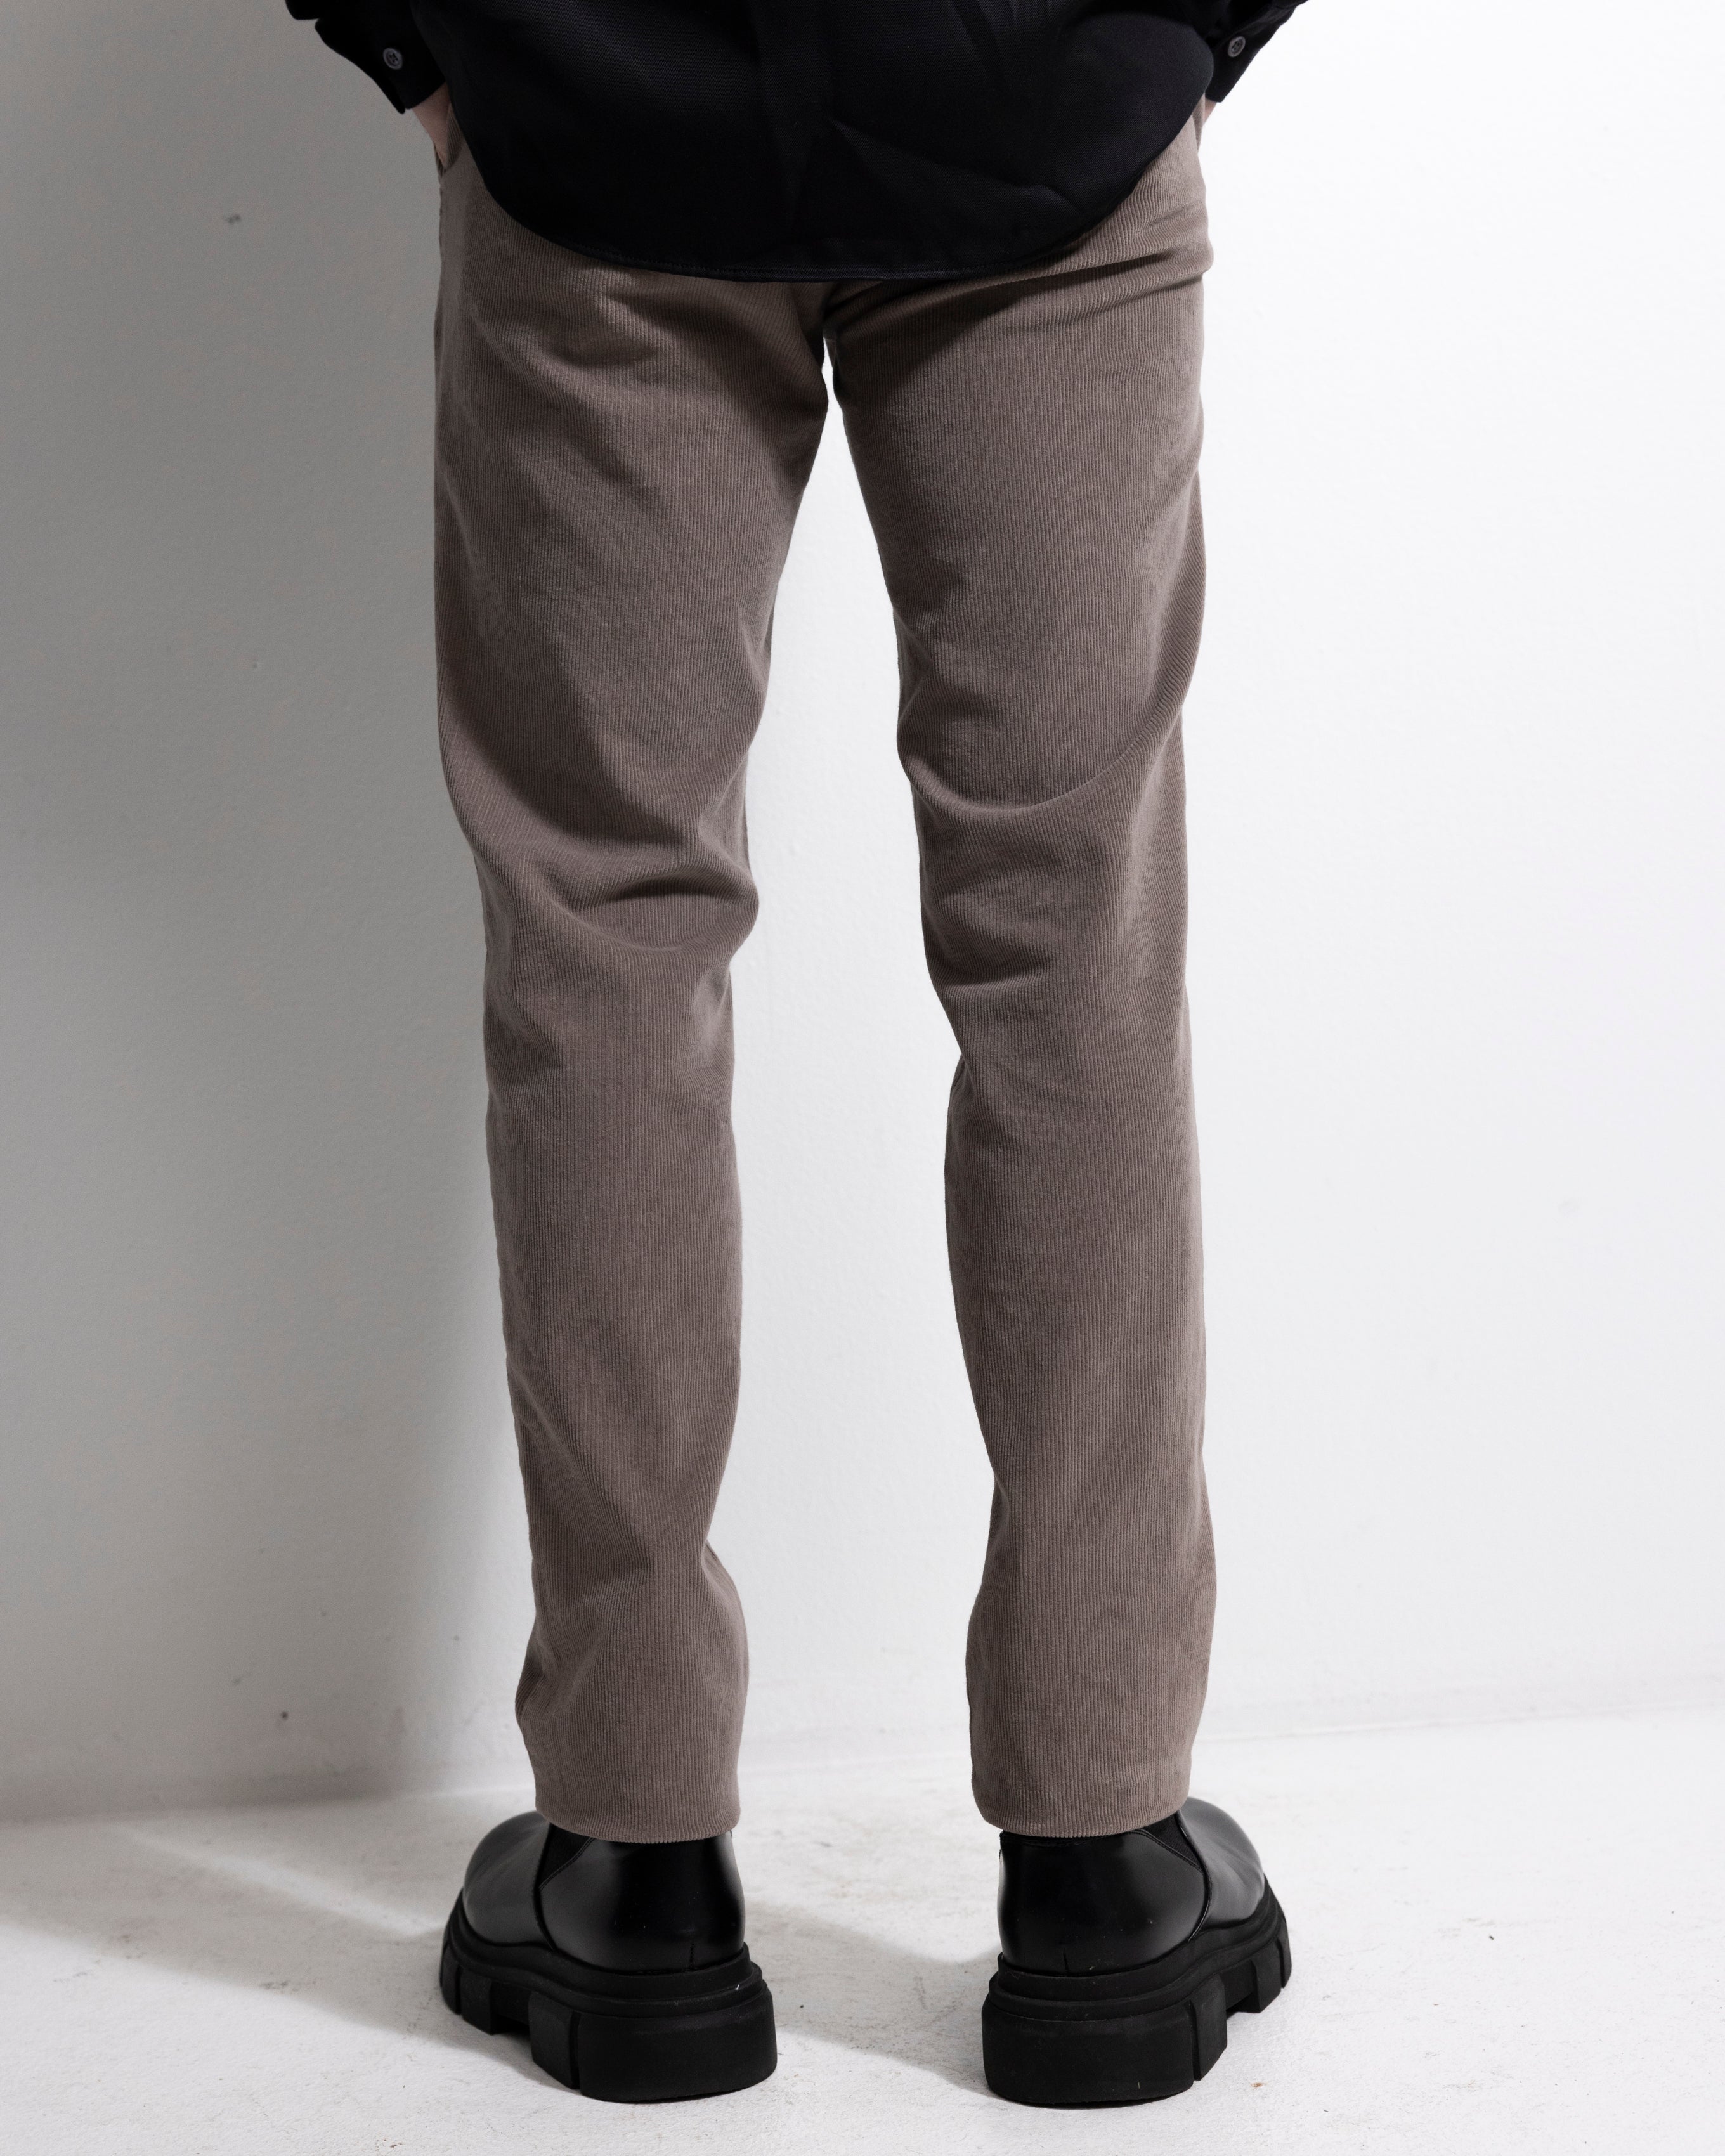 Trousers Cord - Clay-Ljung by Marcus Larsson